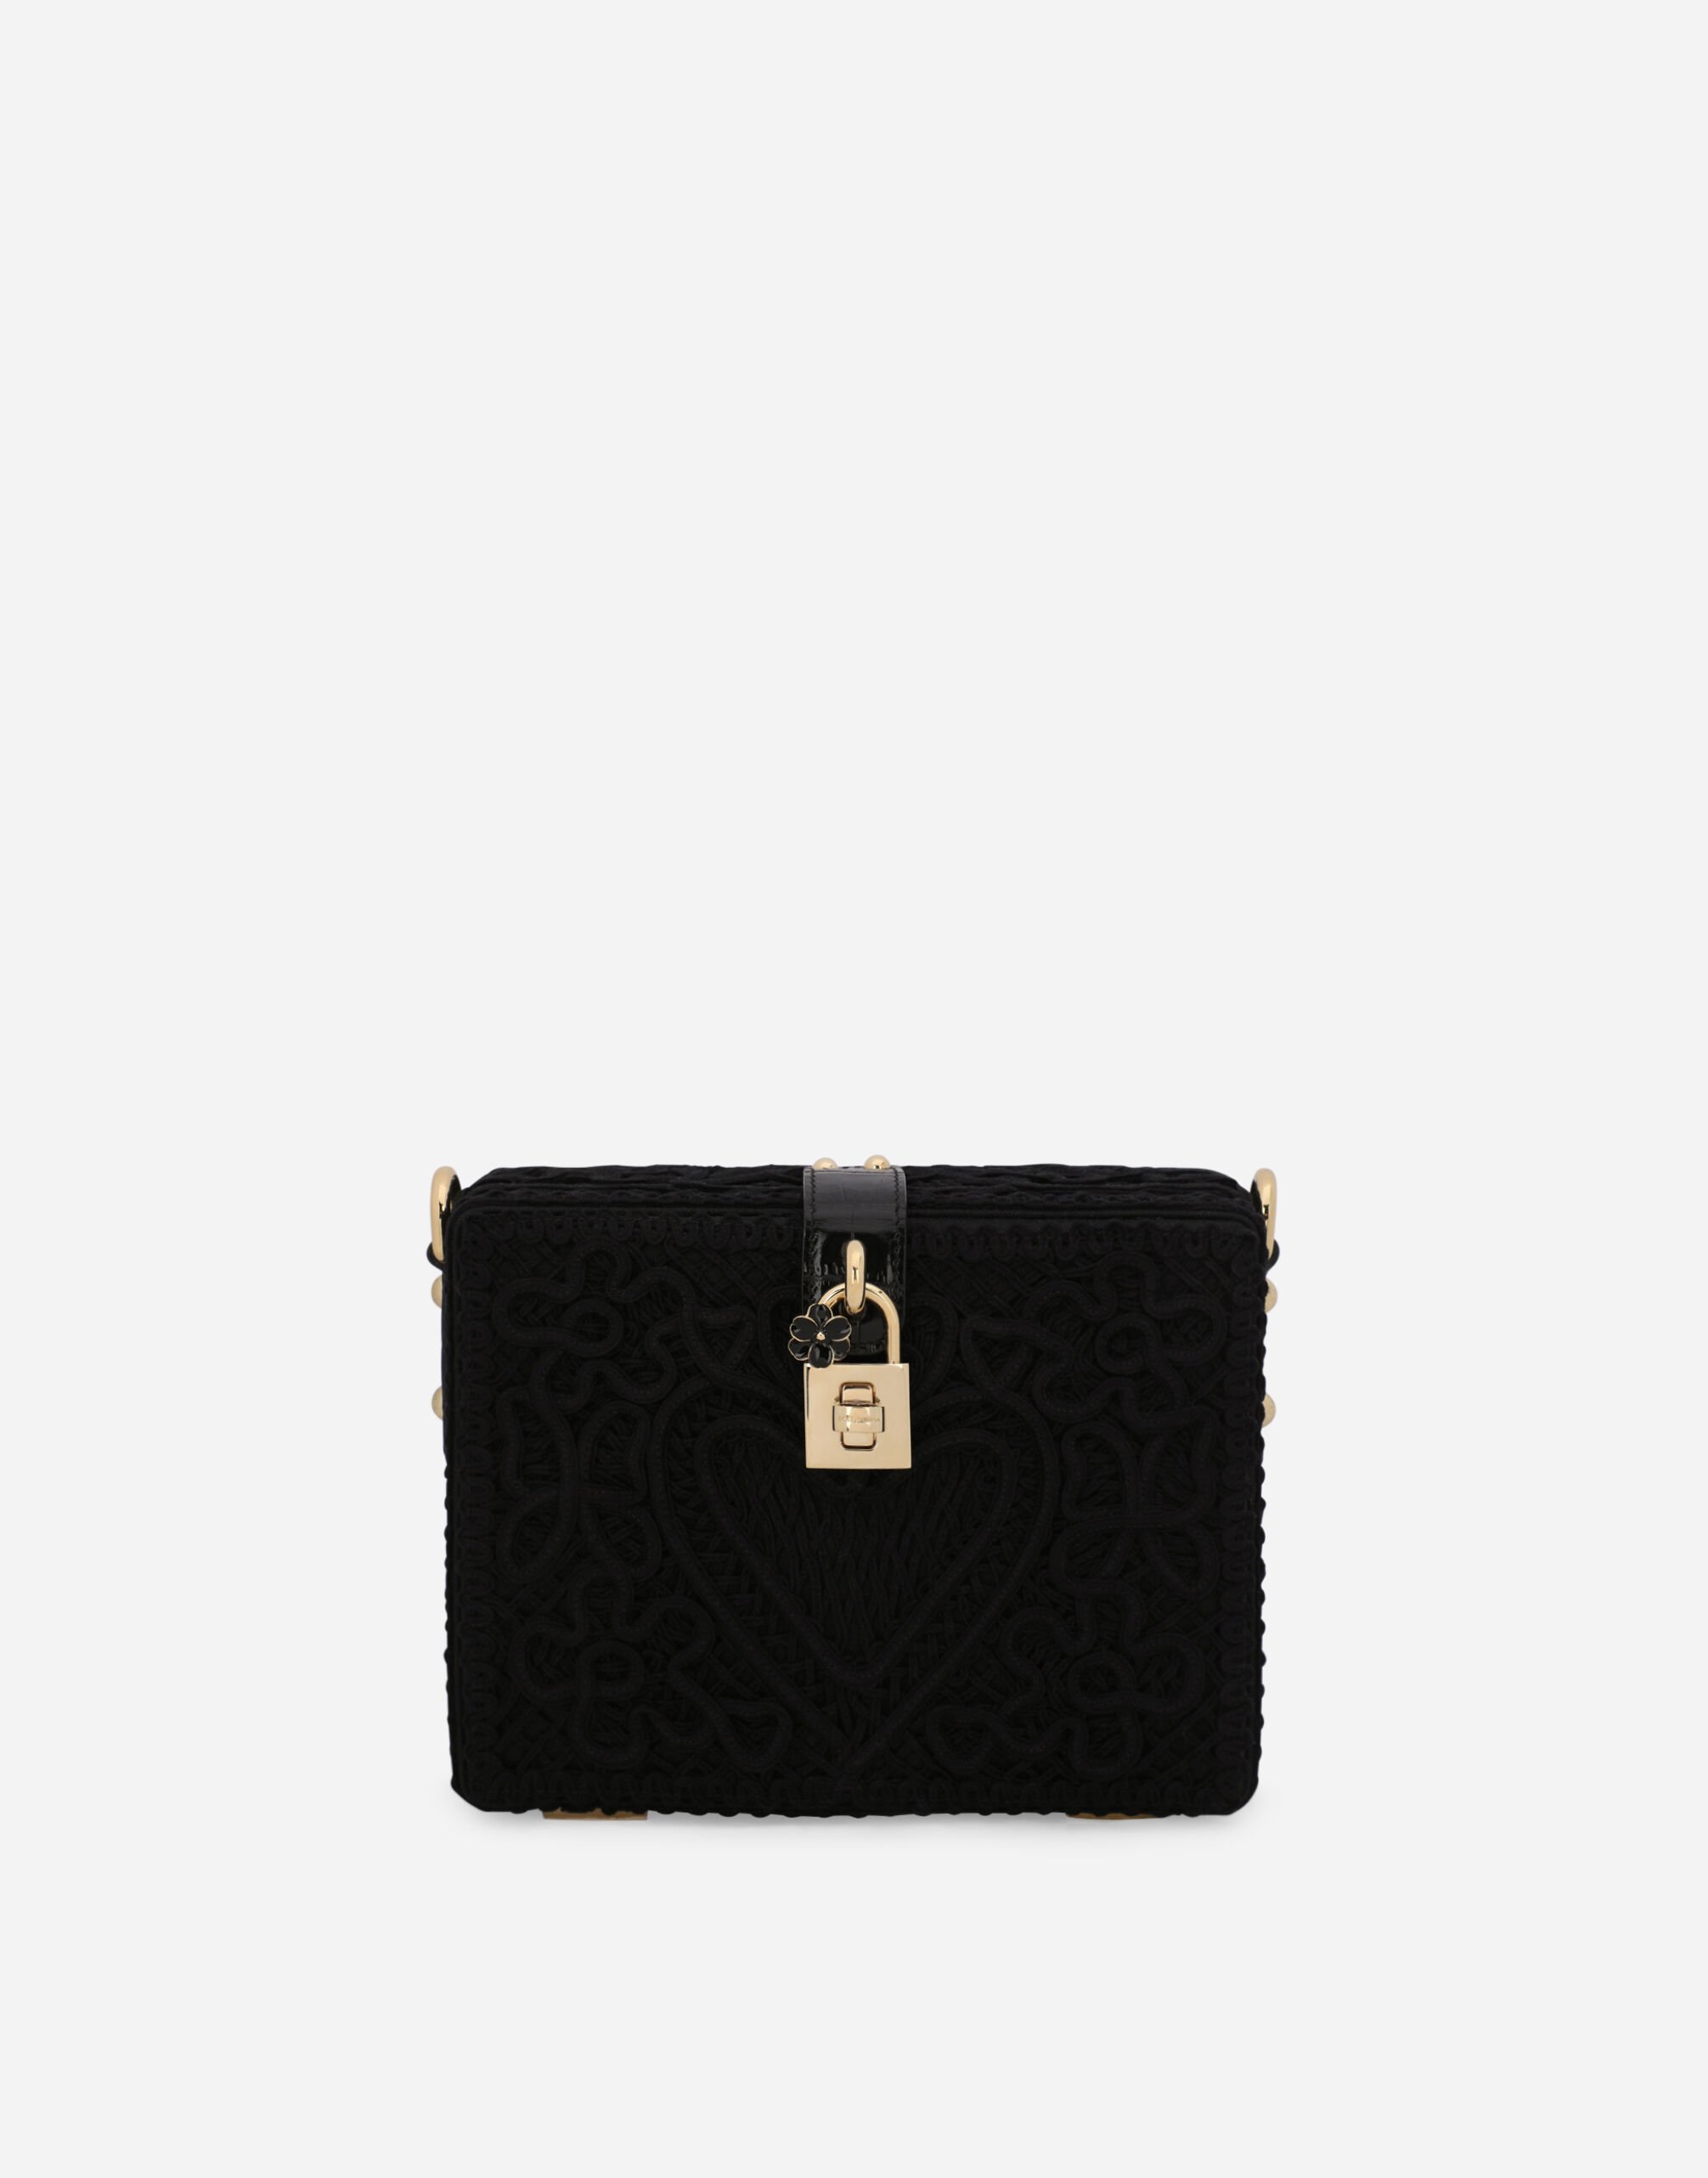 Dolce & Gabbana Dolce Box bag with cordonetto detailing Black BB7100AW437